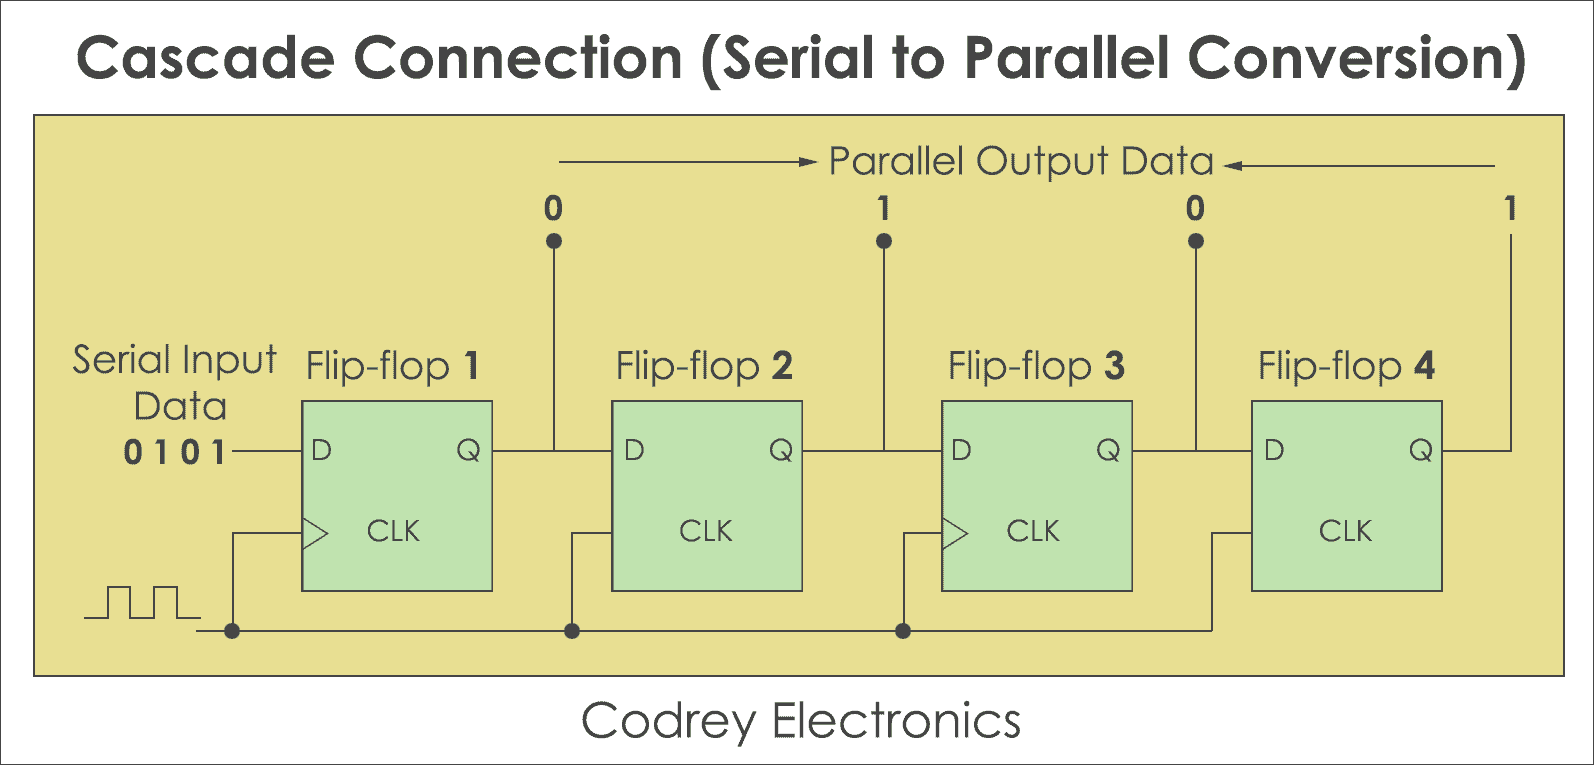 Cascade Connection - Serial to Parallel Conversion